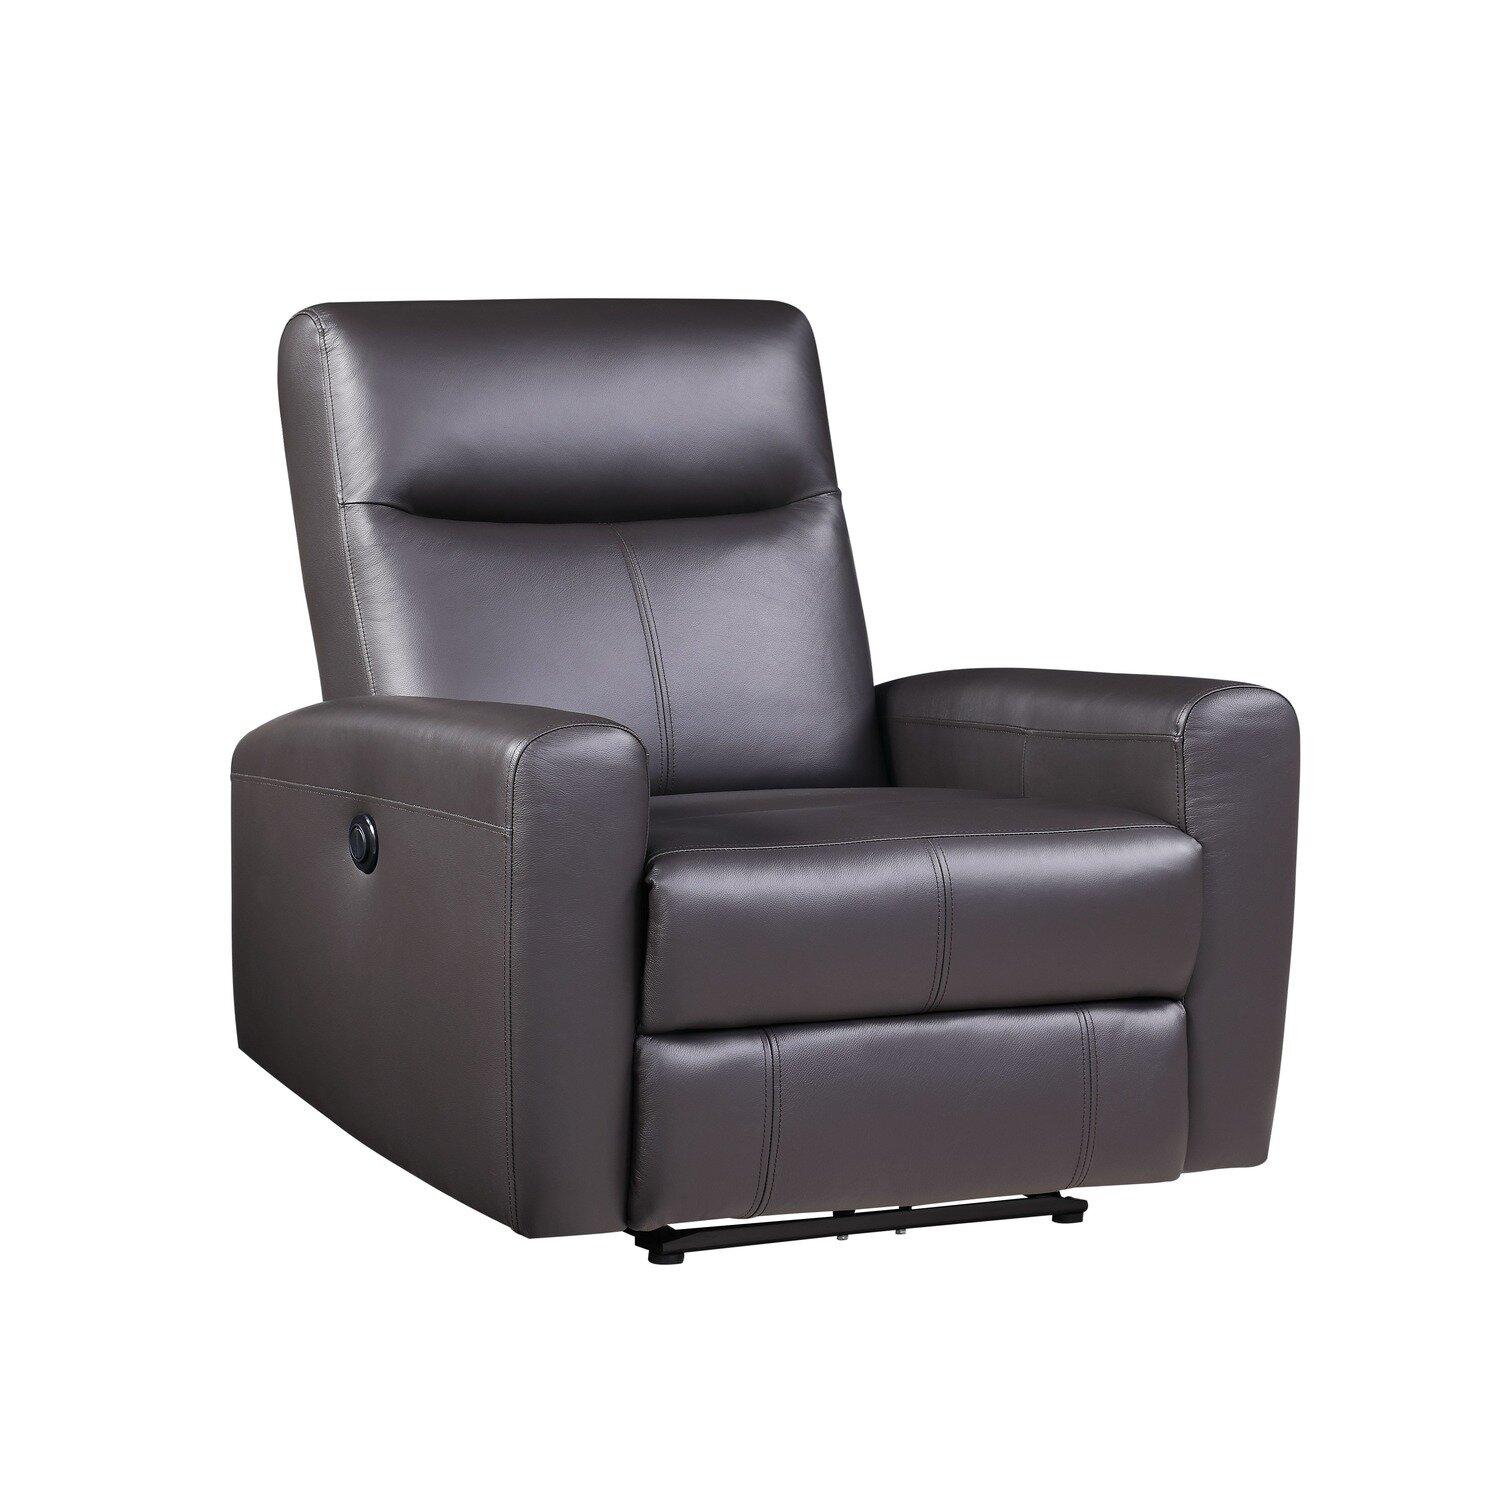 

    
Contemporary Brown Top Grain Leather Match Recliner by Acme Blane 59773
